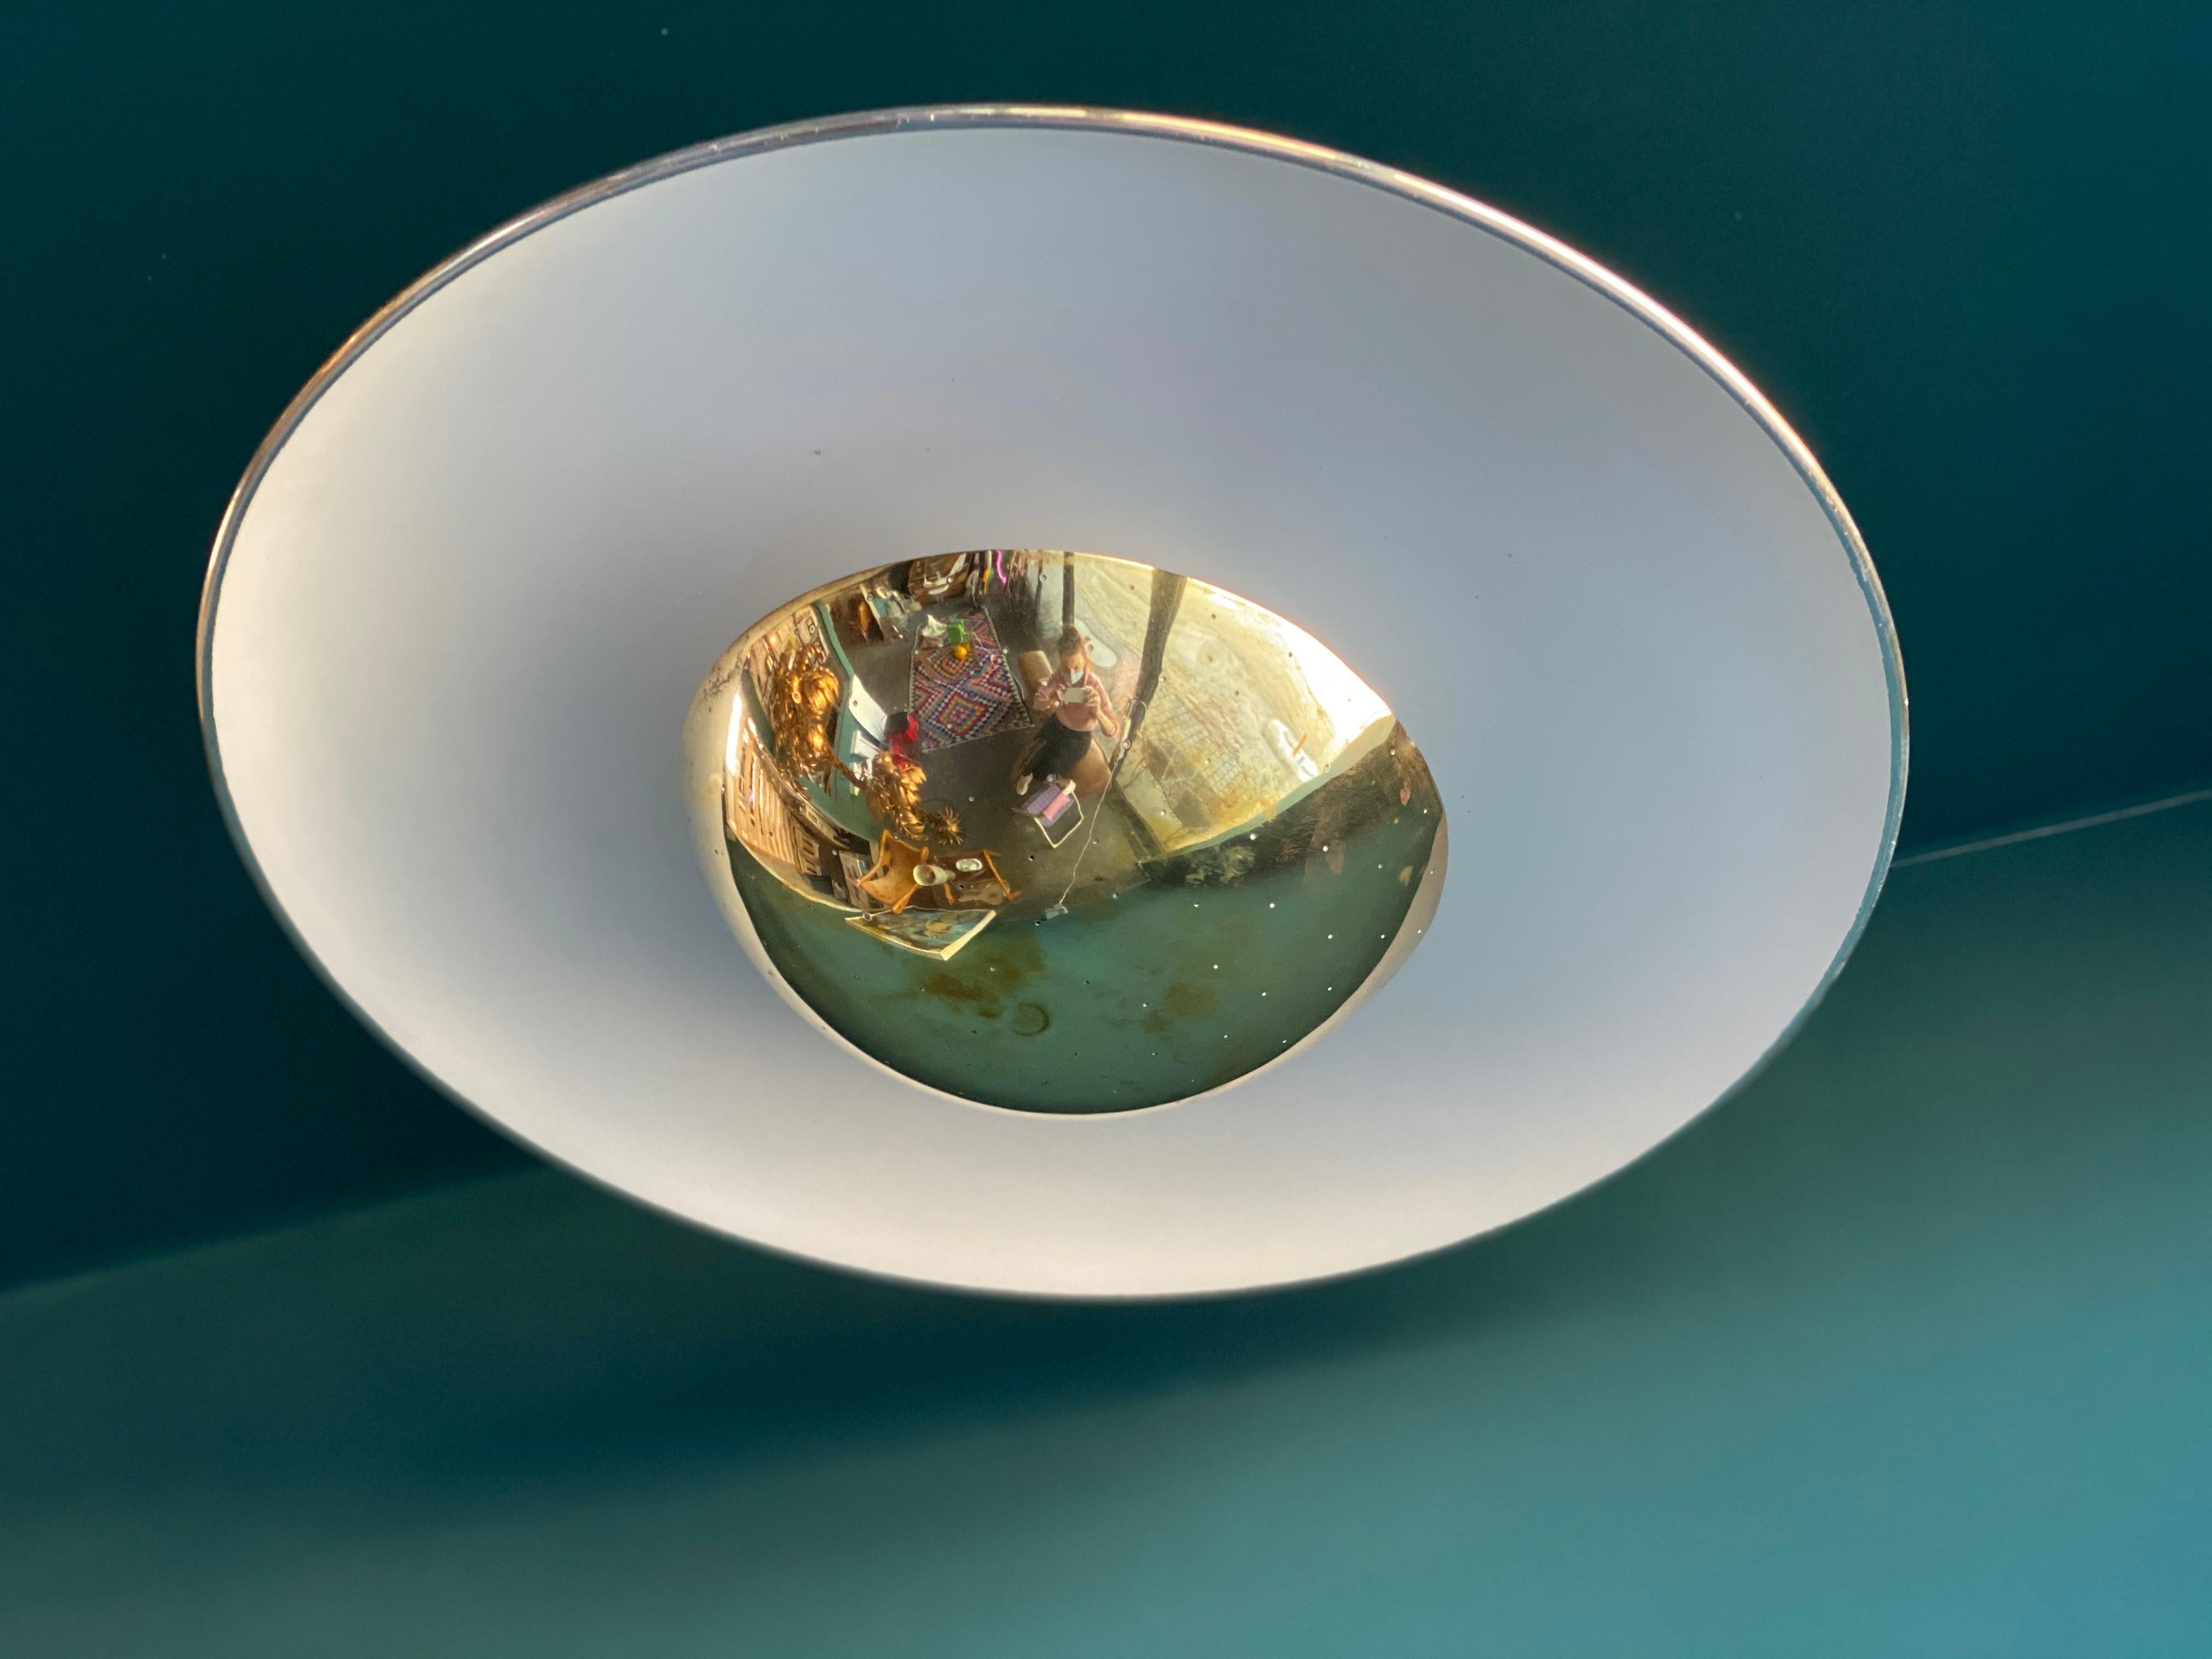 Rare ceiling lamp #155 by designer Gino Sarfatti for Arteluce from the 1950s. The aluminum reflector is painted white and decorated with a brass rim. Under the brass shade with small holes there are three E27 sockets, which provide a very nice